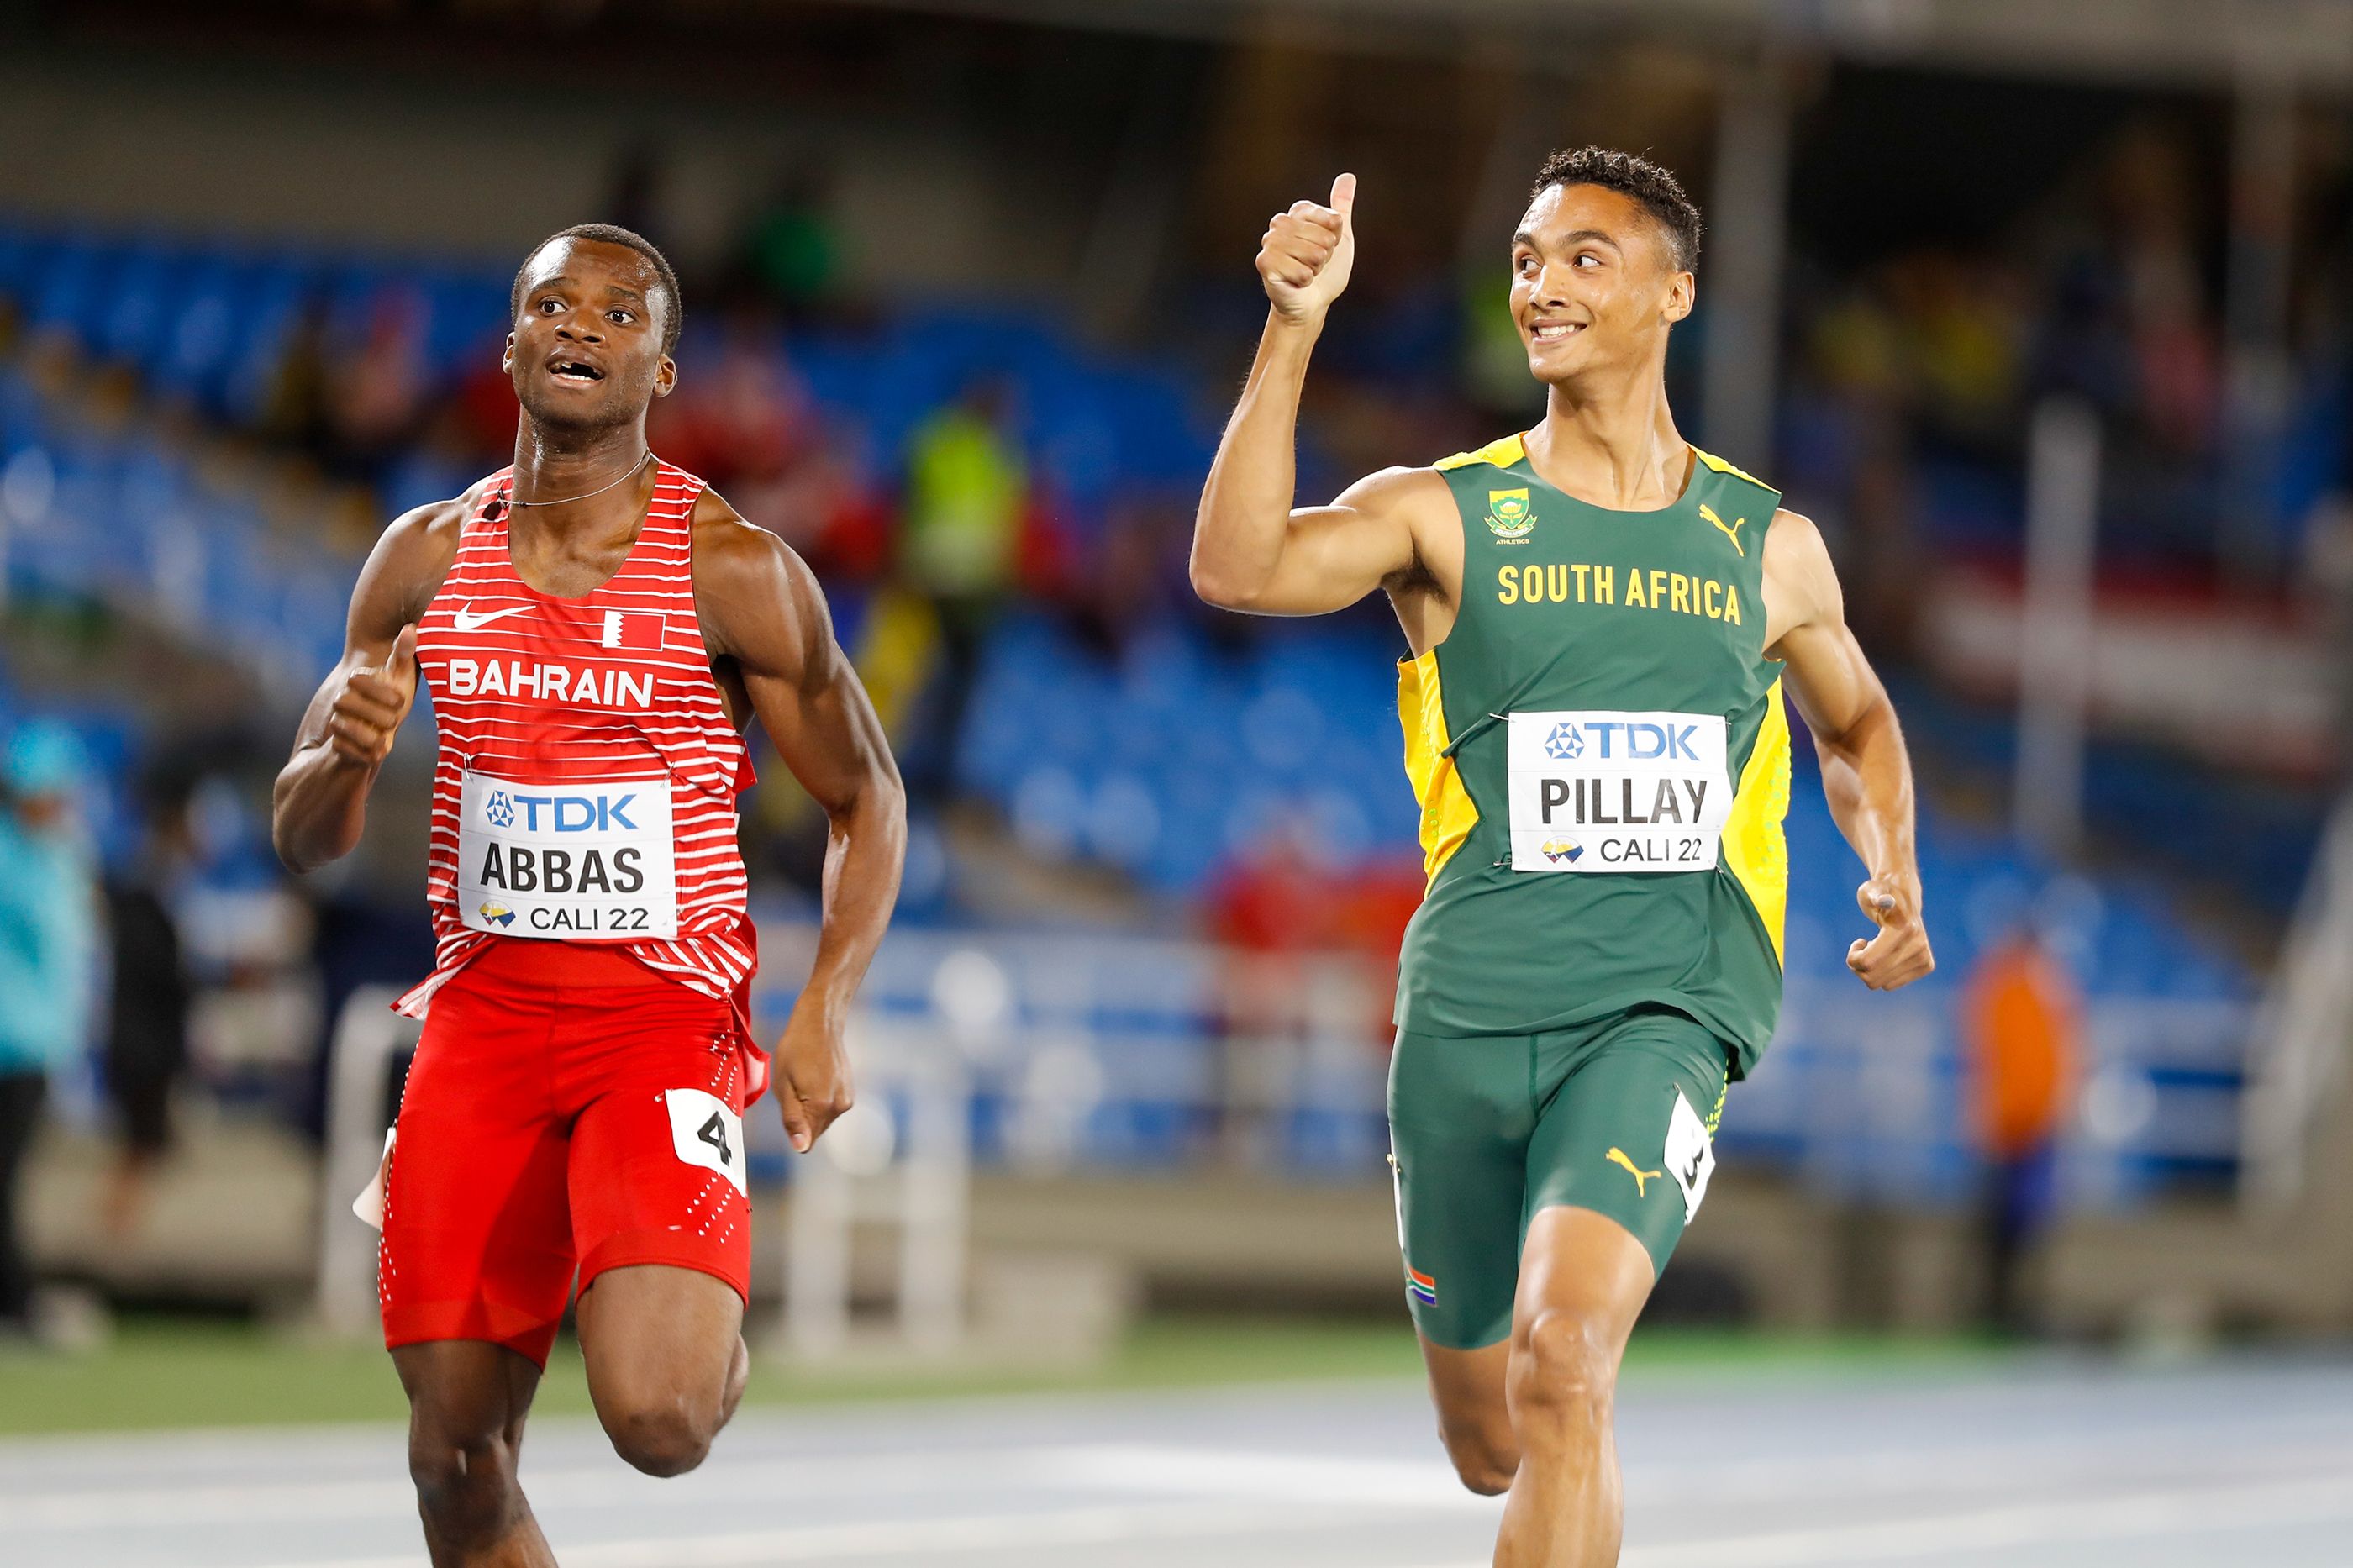 Lythe Pillay in the 400m semifinals at the World Athletics U20 Championships Cali 22